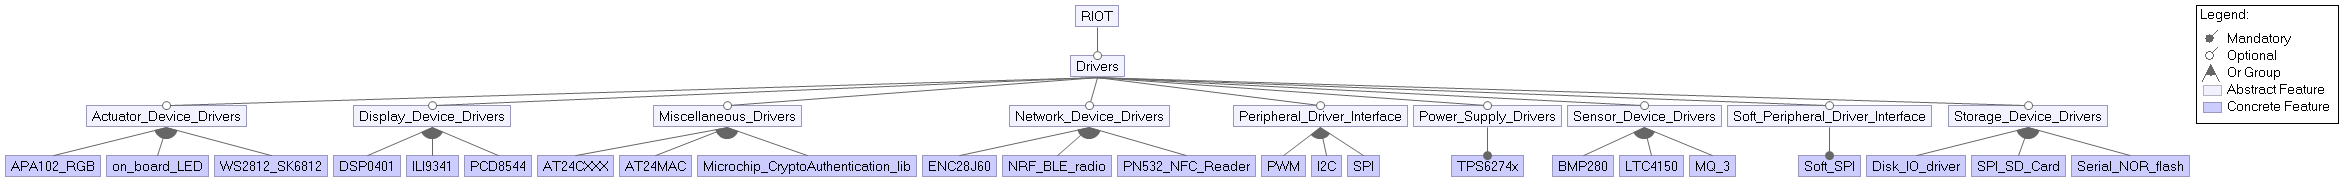 Feature model of the optional drivers. For readability only a small selection of the possible drivers is shown.